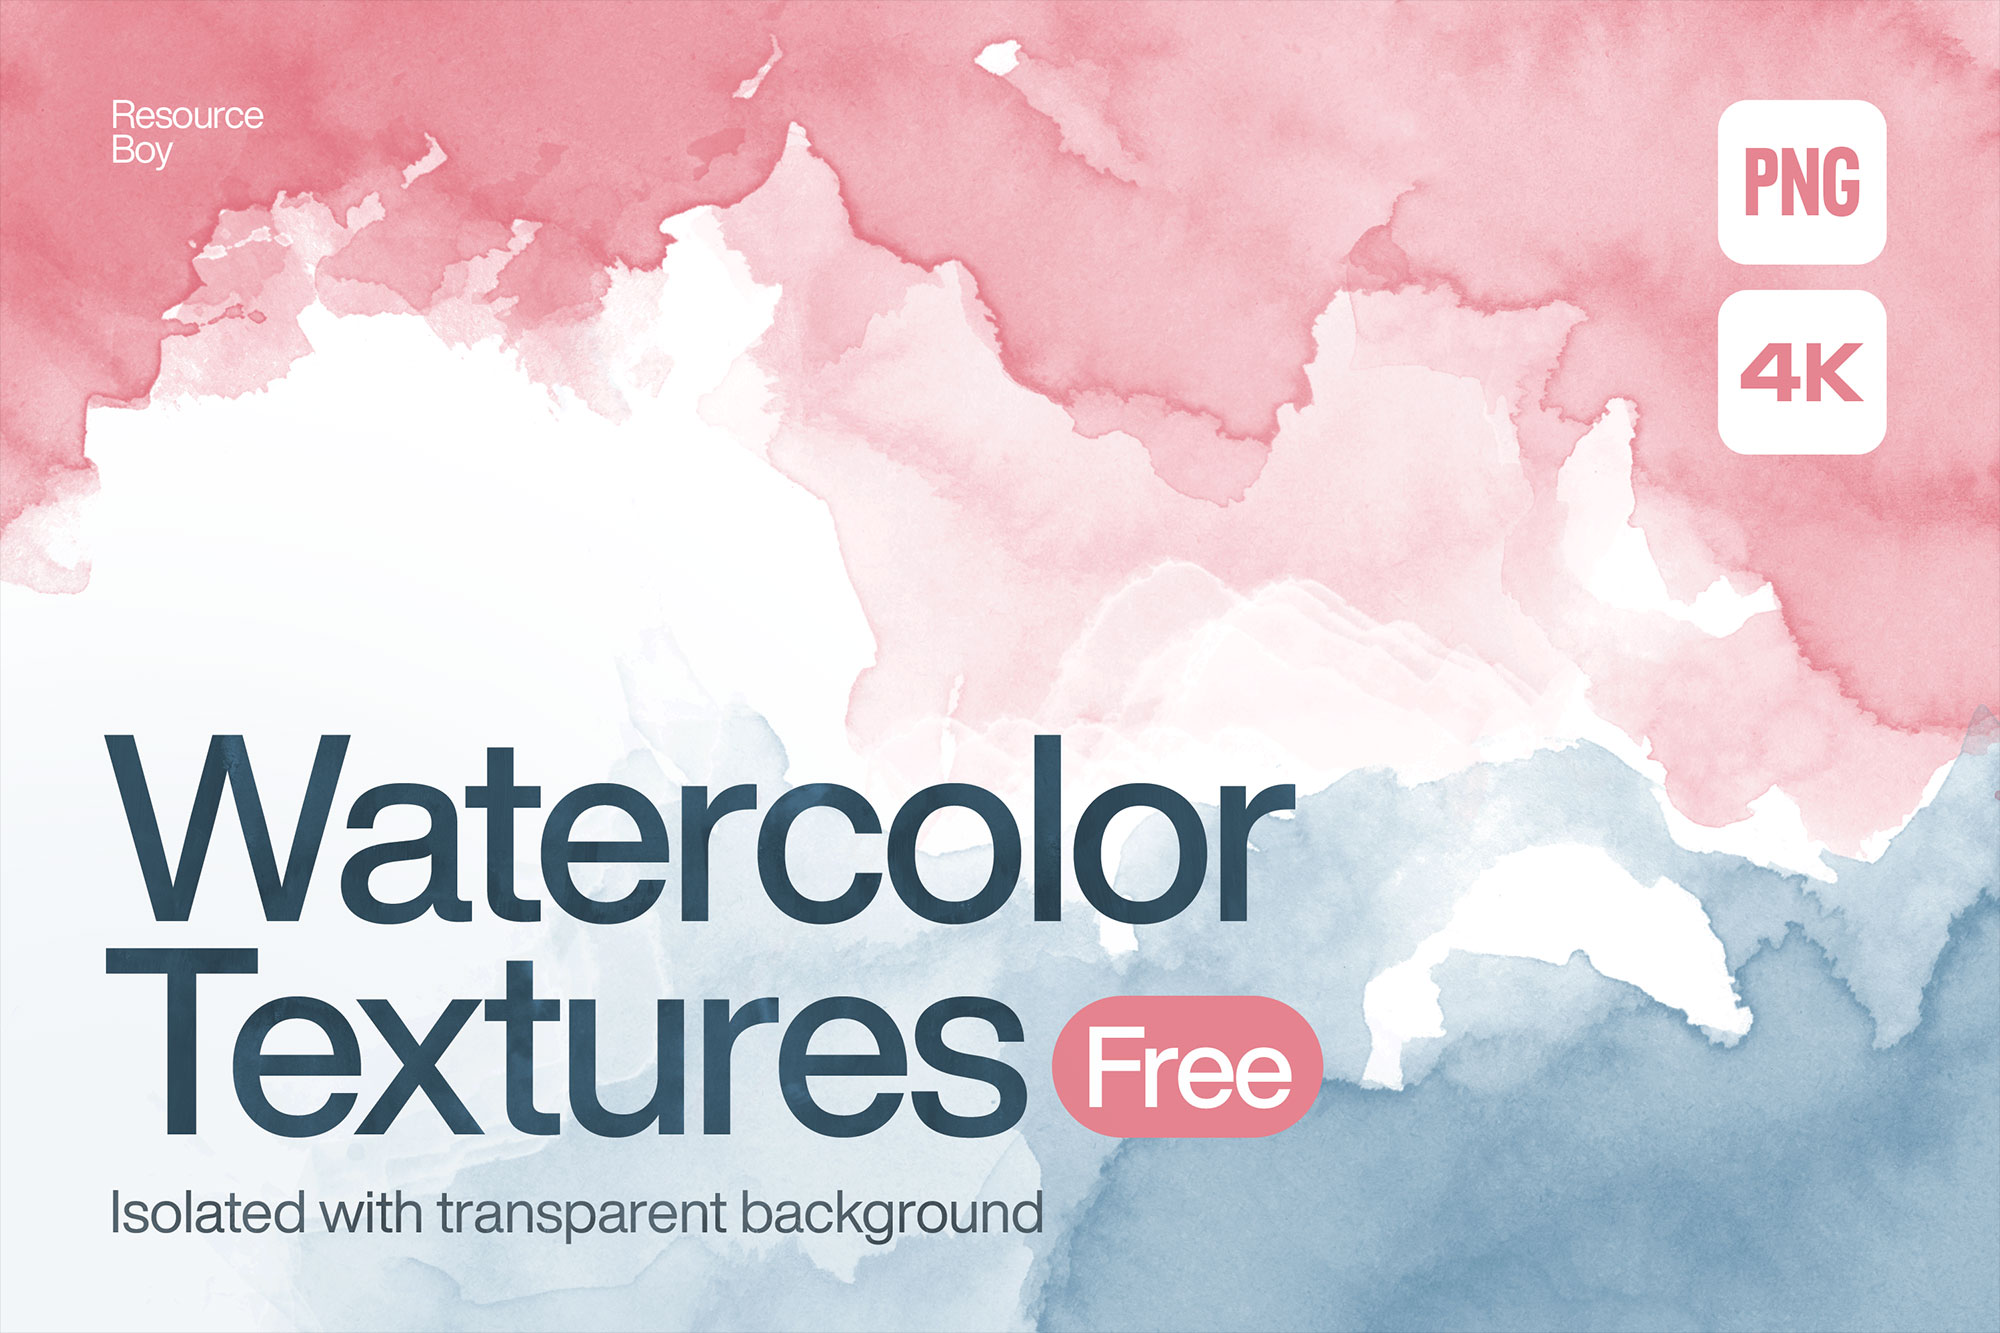 100 Free Watercolor Photoshop Brushes [High Resolution] - Resource Boy